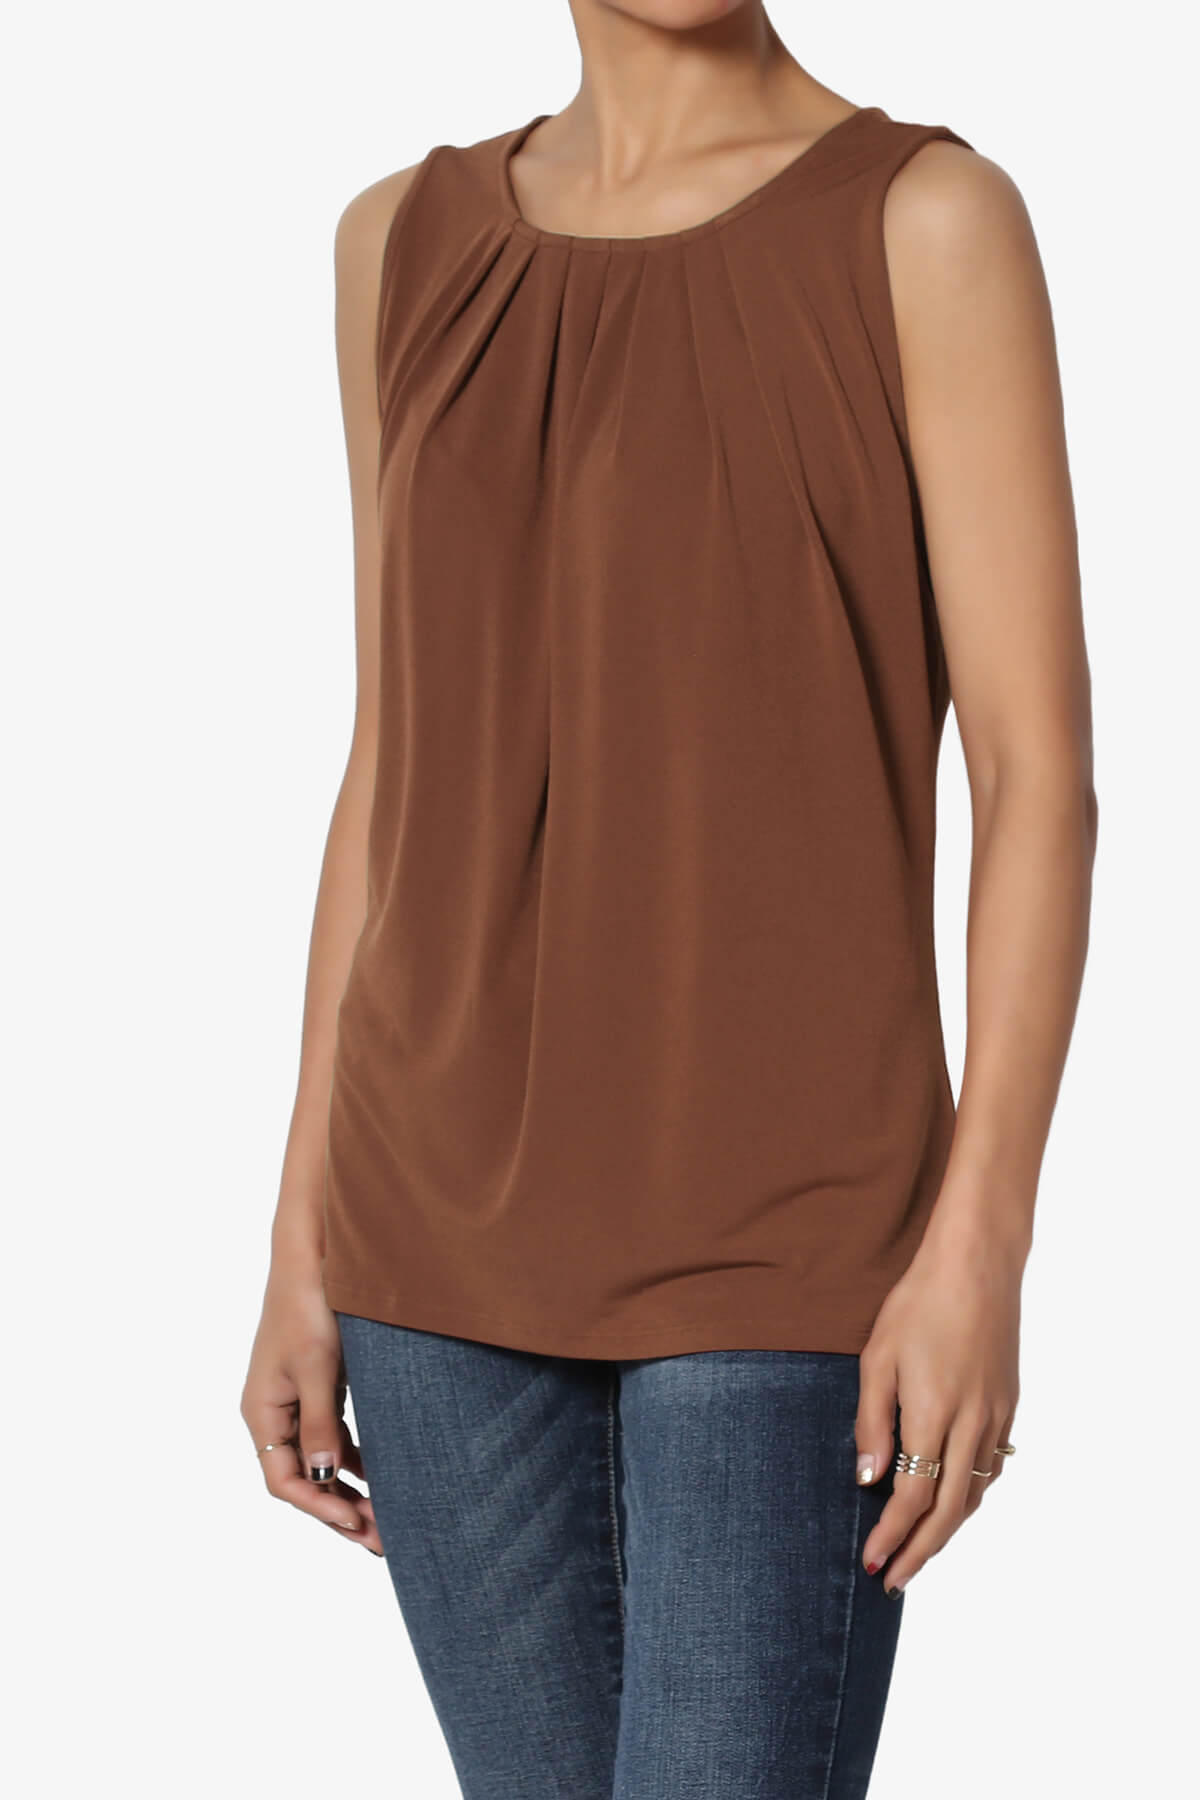 Load image into Gallery viewer, Chaffee Pleat Neck Tank Top LIGHT BROWN_3
